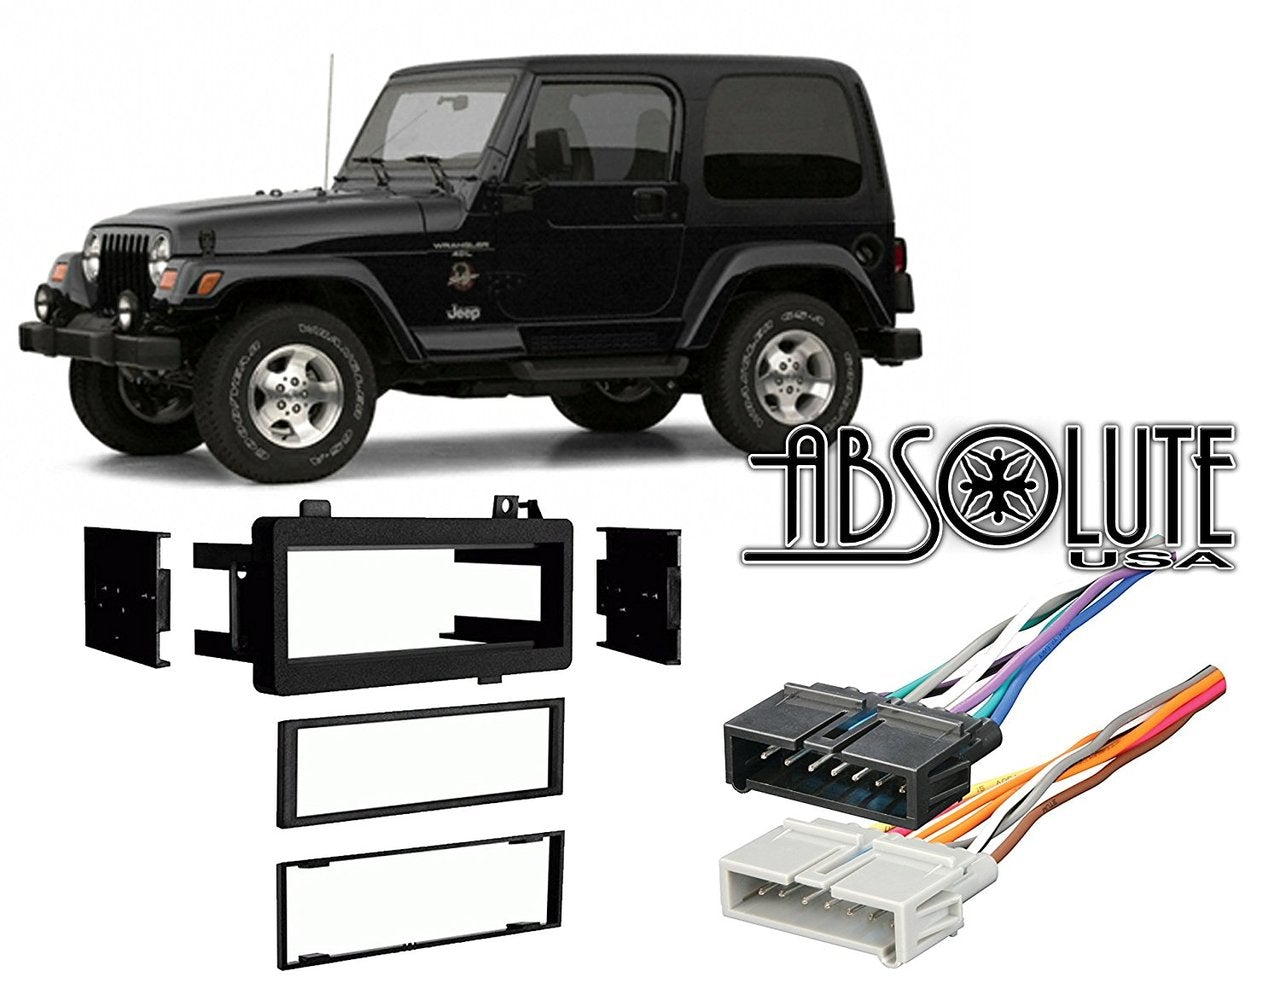 Absolute USA ABS99-6501 Compatible with Jeep Wrangler 1997 1998 1999 2000 2001 2002 Single DIN Stereo Harness Radio Install Dash Kit Package